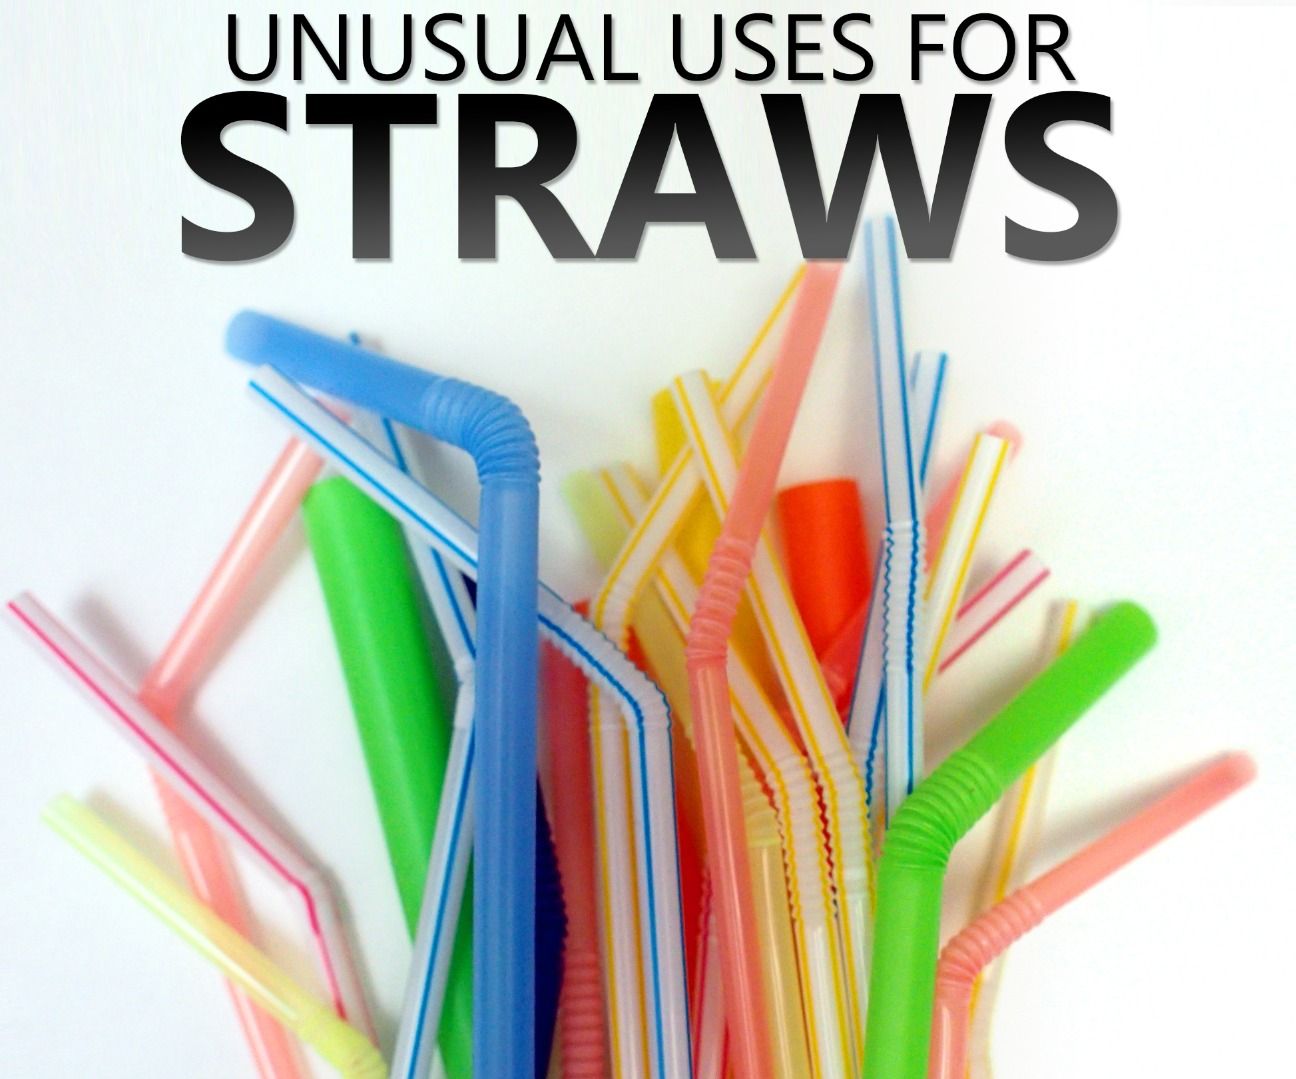 11 Unusual Uses for Straws